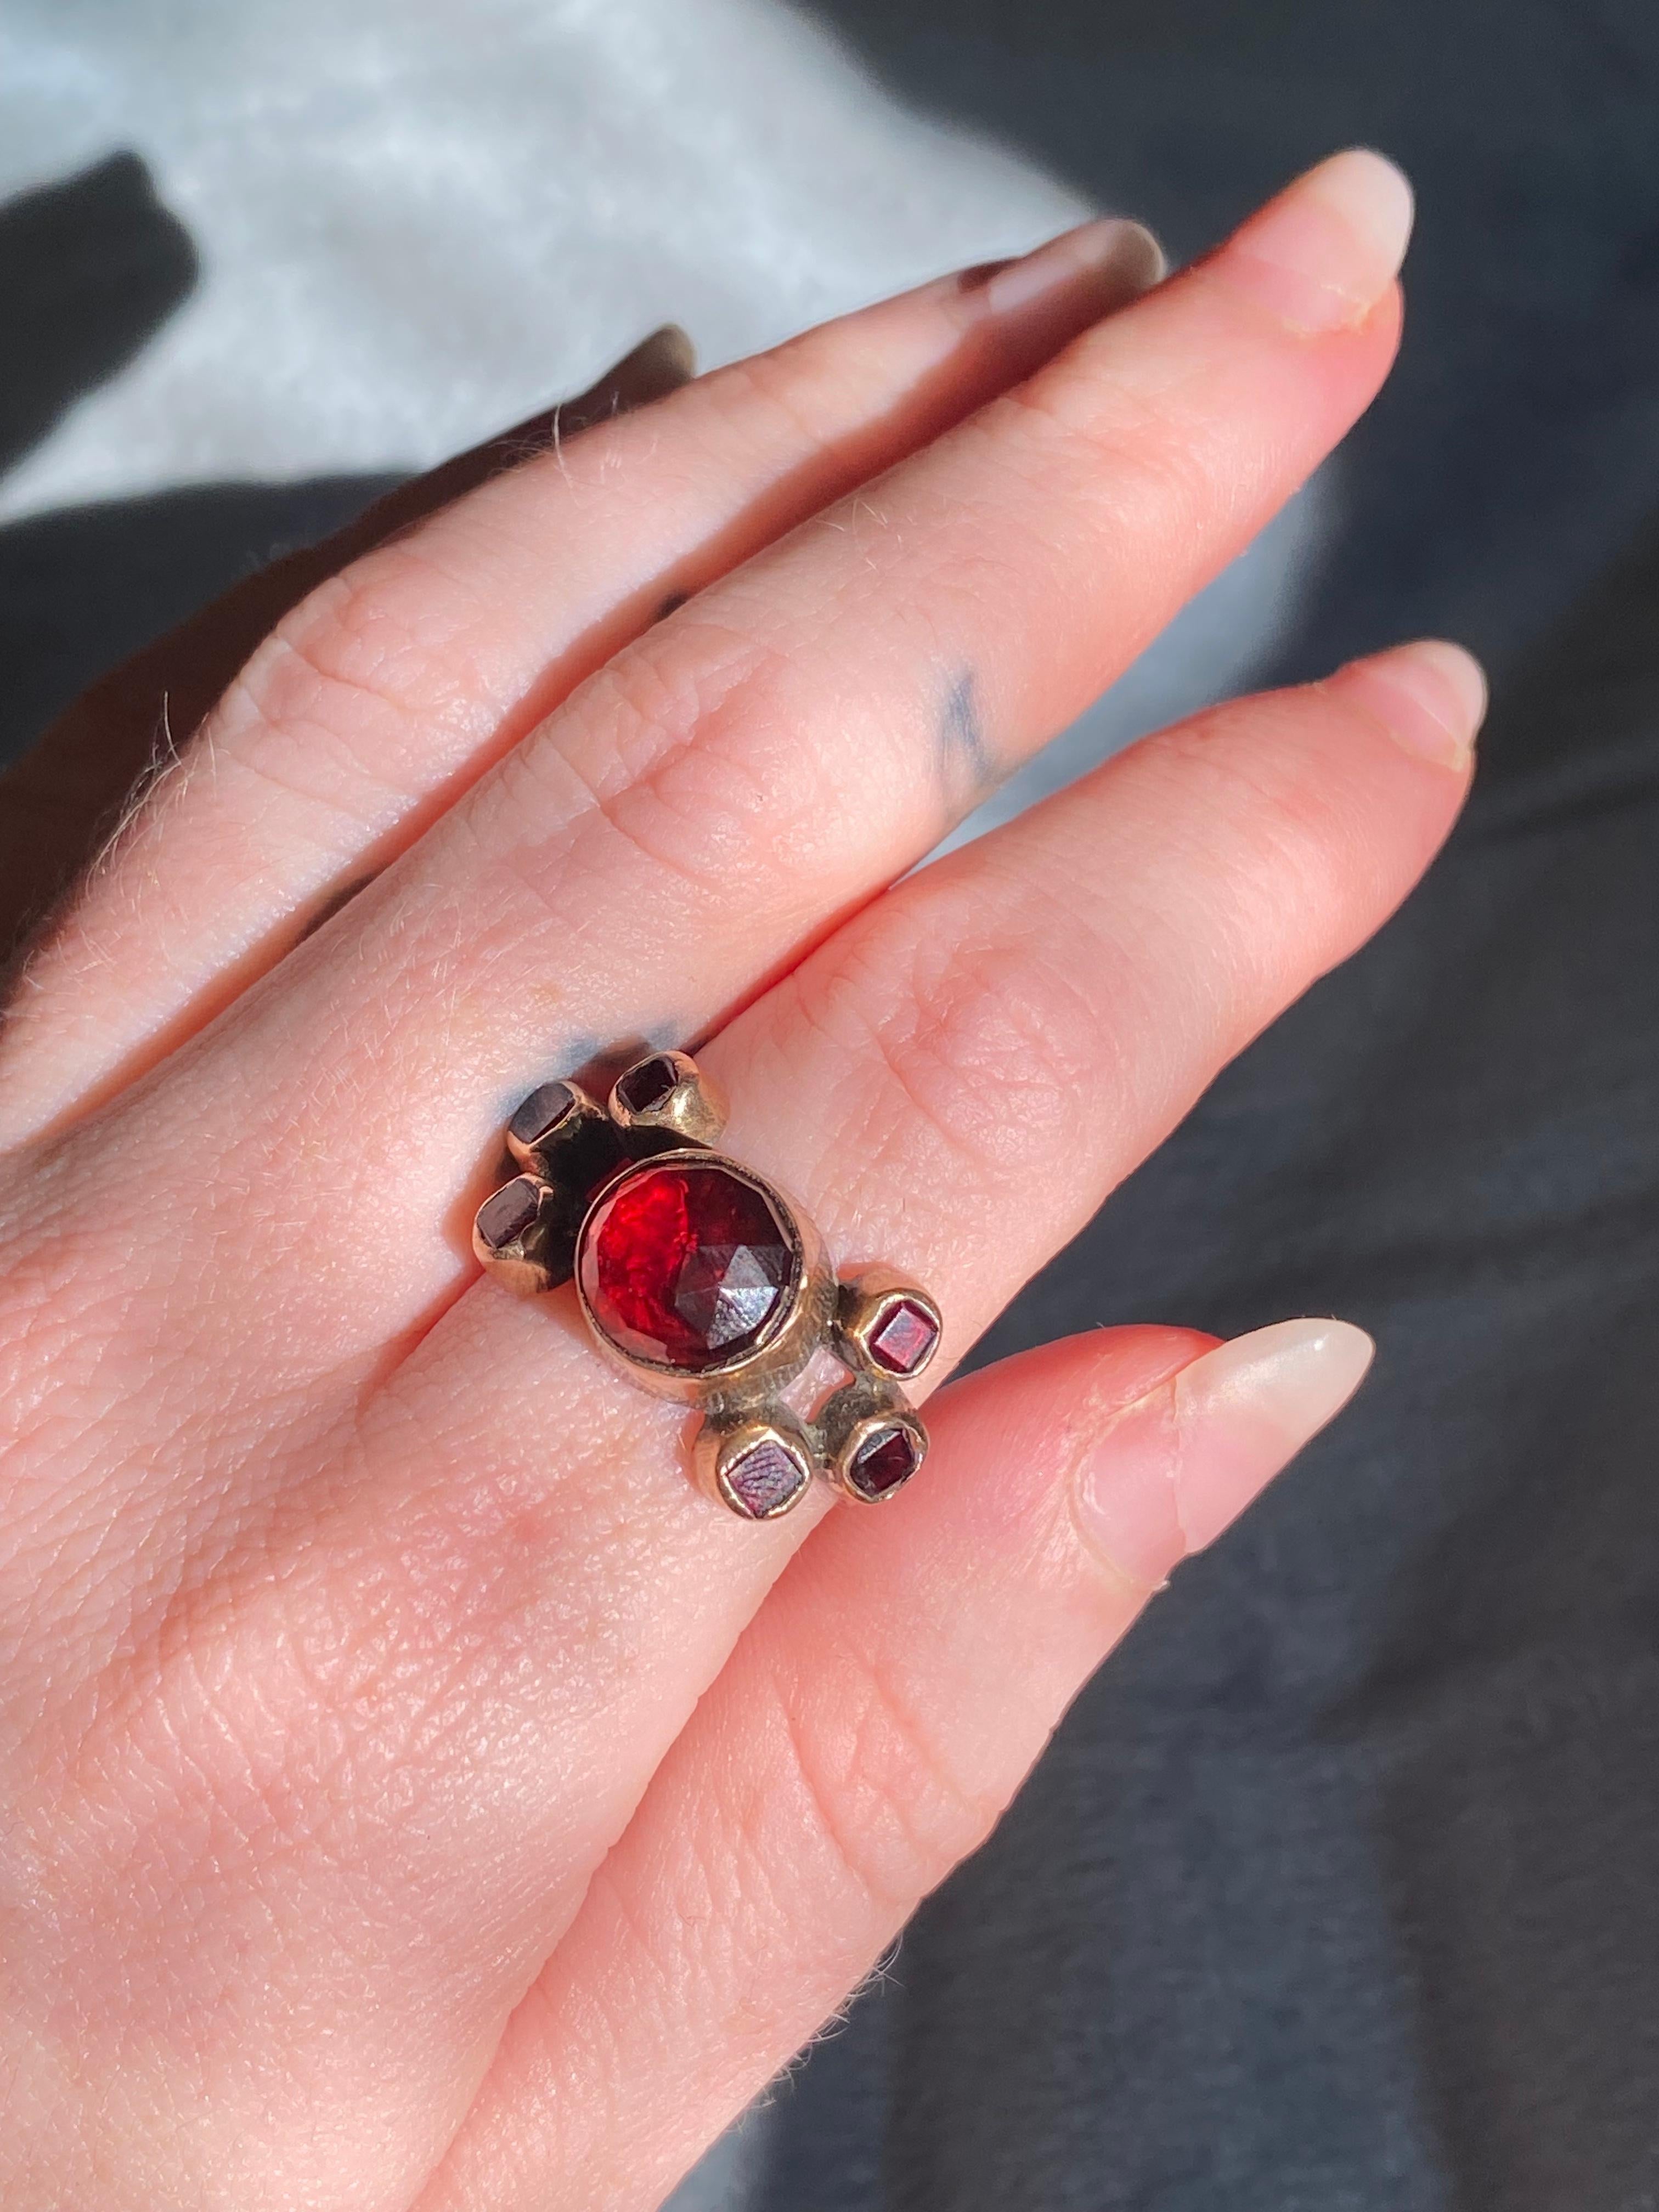 Iberian Ring with Rose Cut Garnets, 9-12k, 1700s For Sale 1